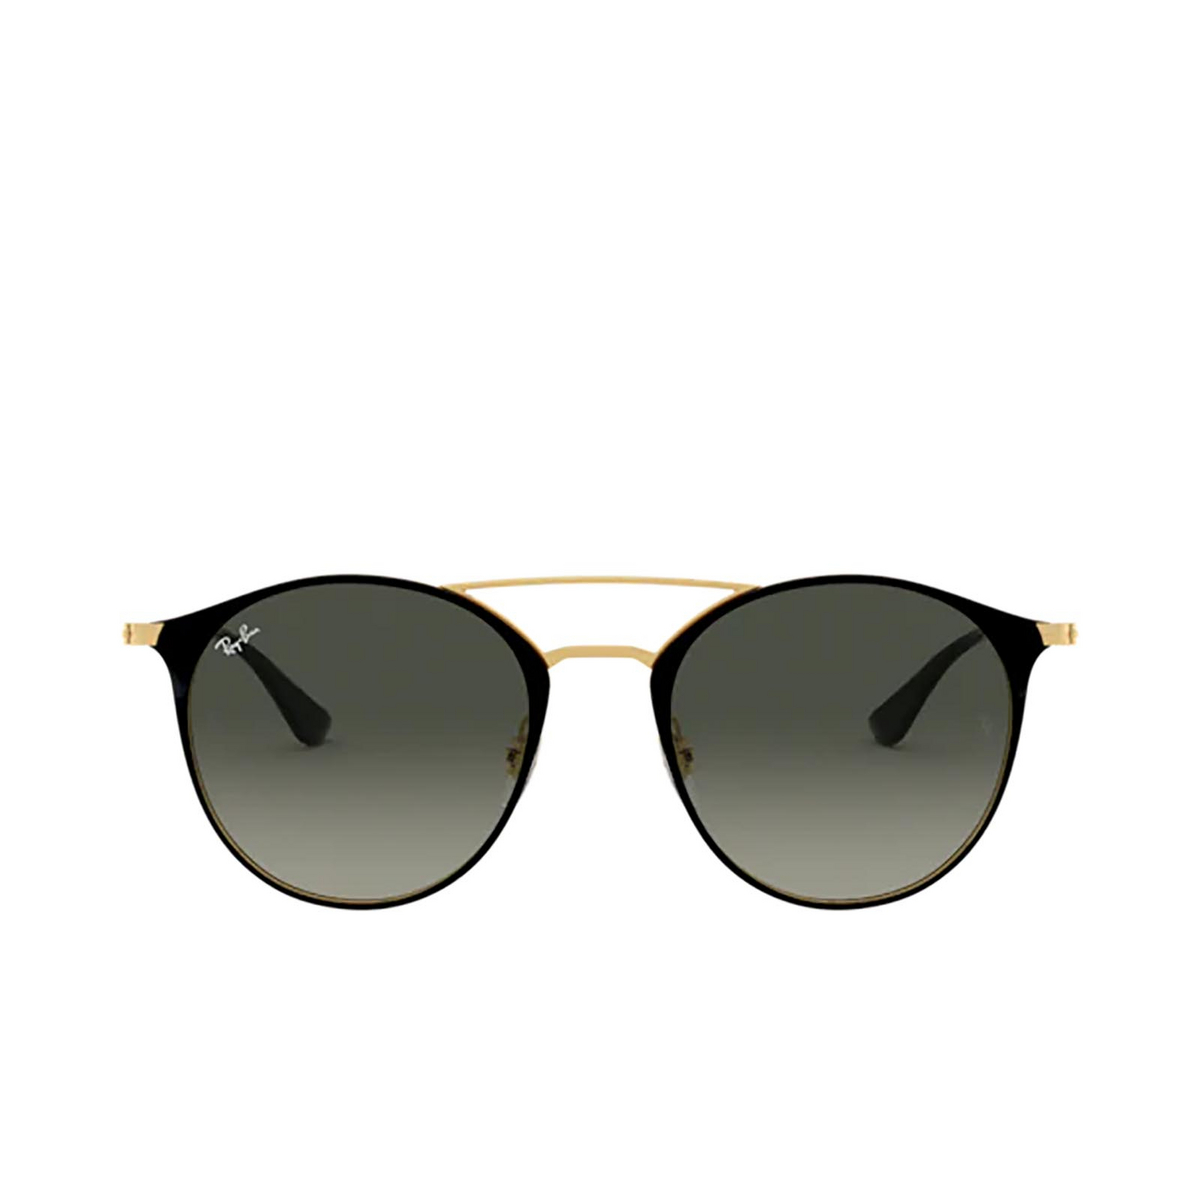 Ray-Ban® Round Sunglasses: RB3546 color 187/71 Black On Arista - front view